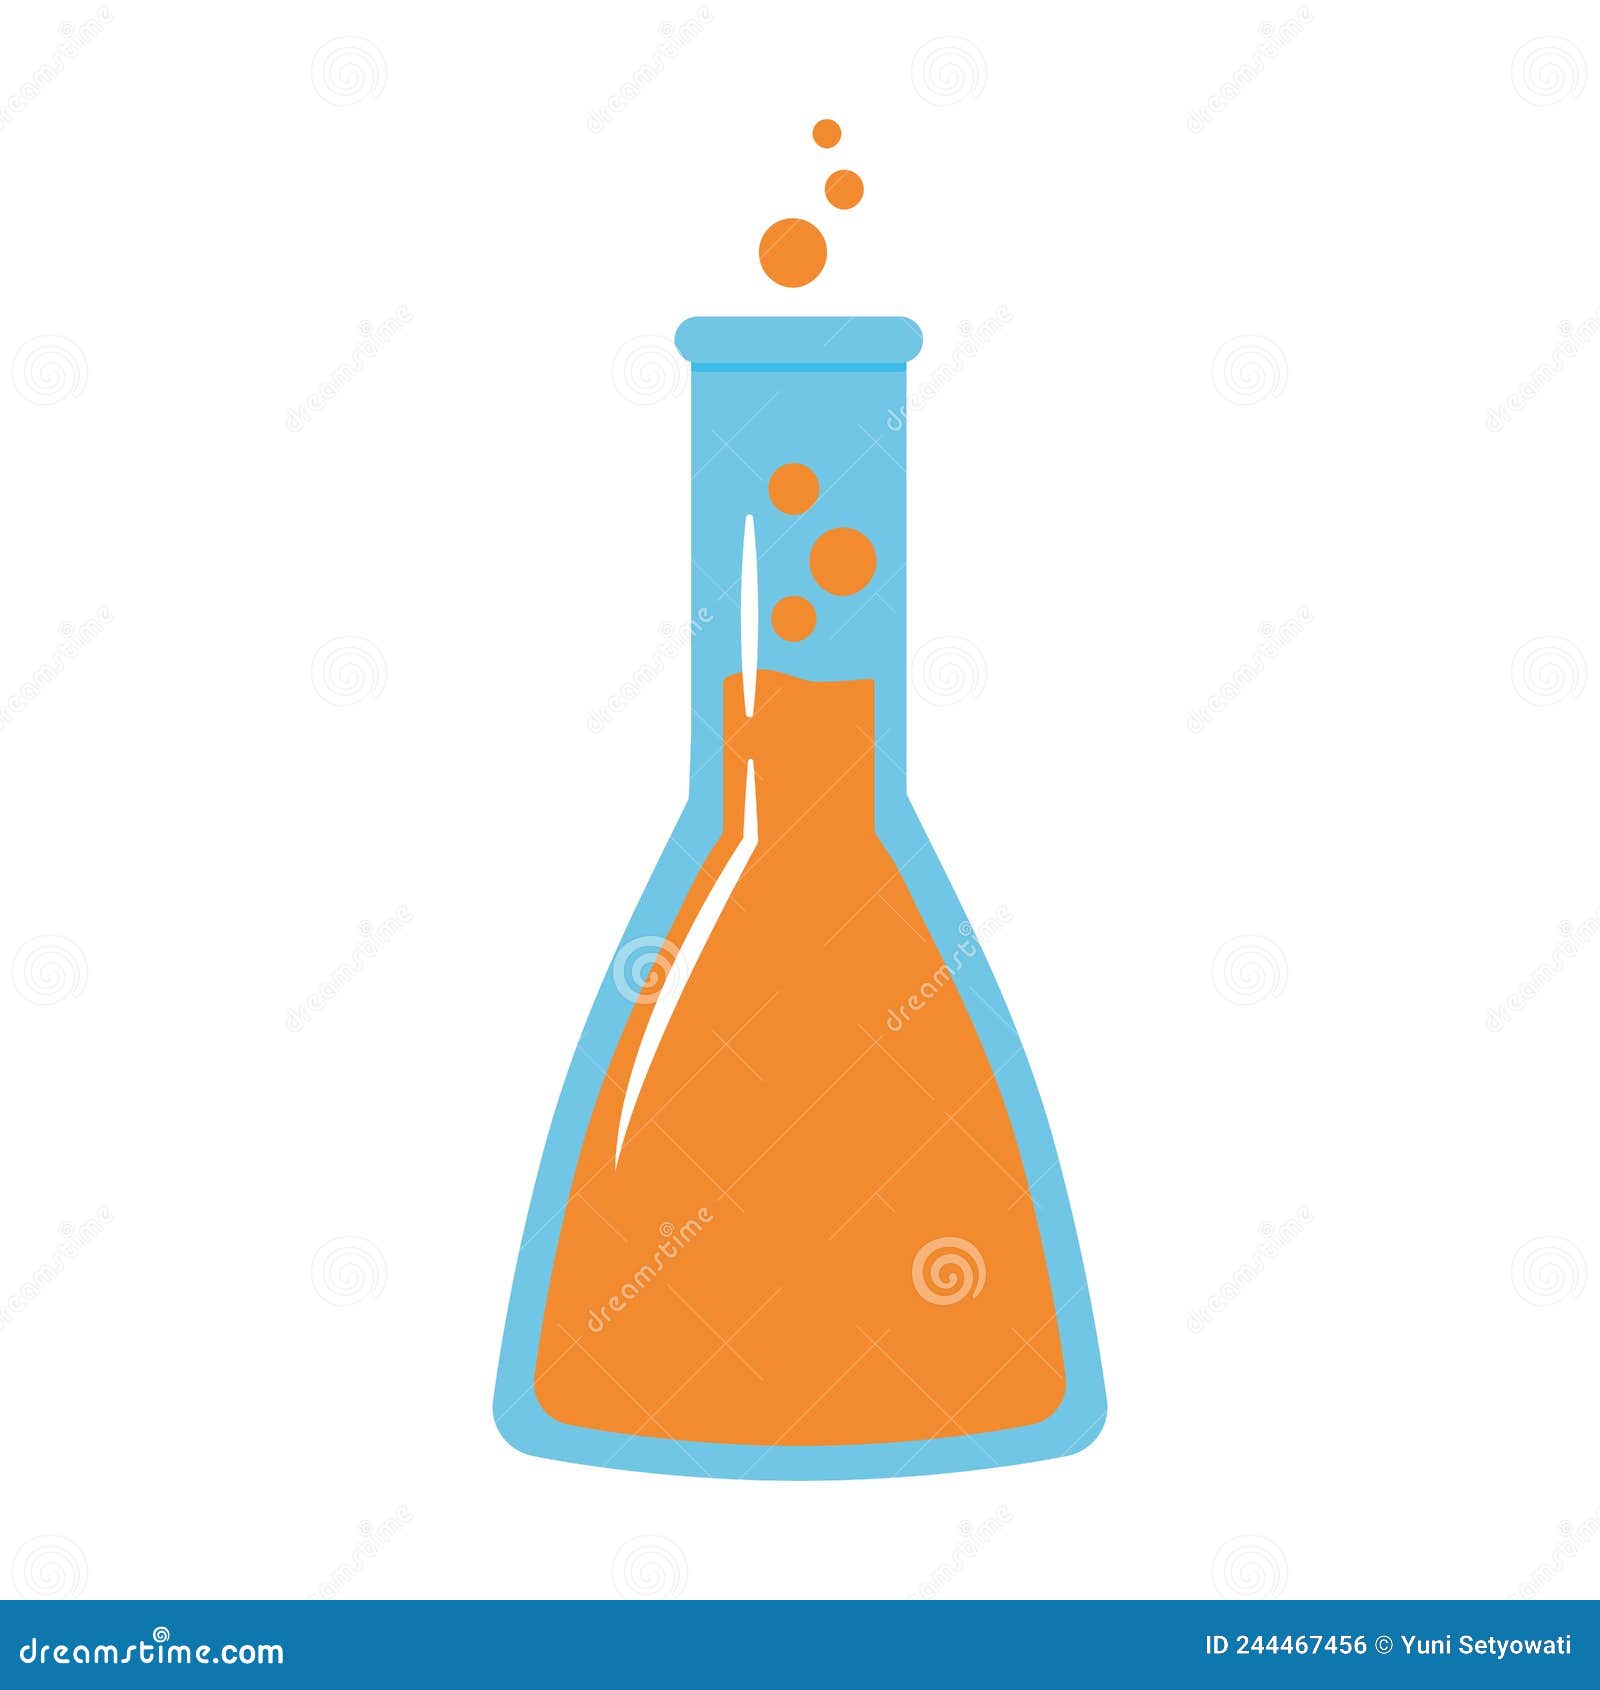 Animated Hand Drawn Lab Chemistry Icon Clipart Cartoon Vector for School  Banner Decoration Element Stock Vector - Illustration of back, font:  244467456